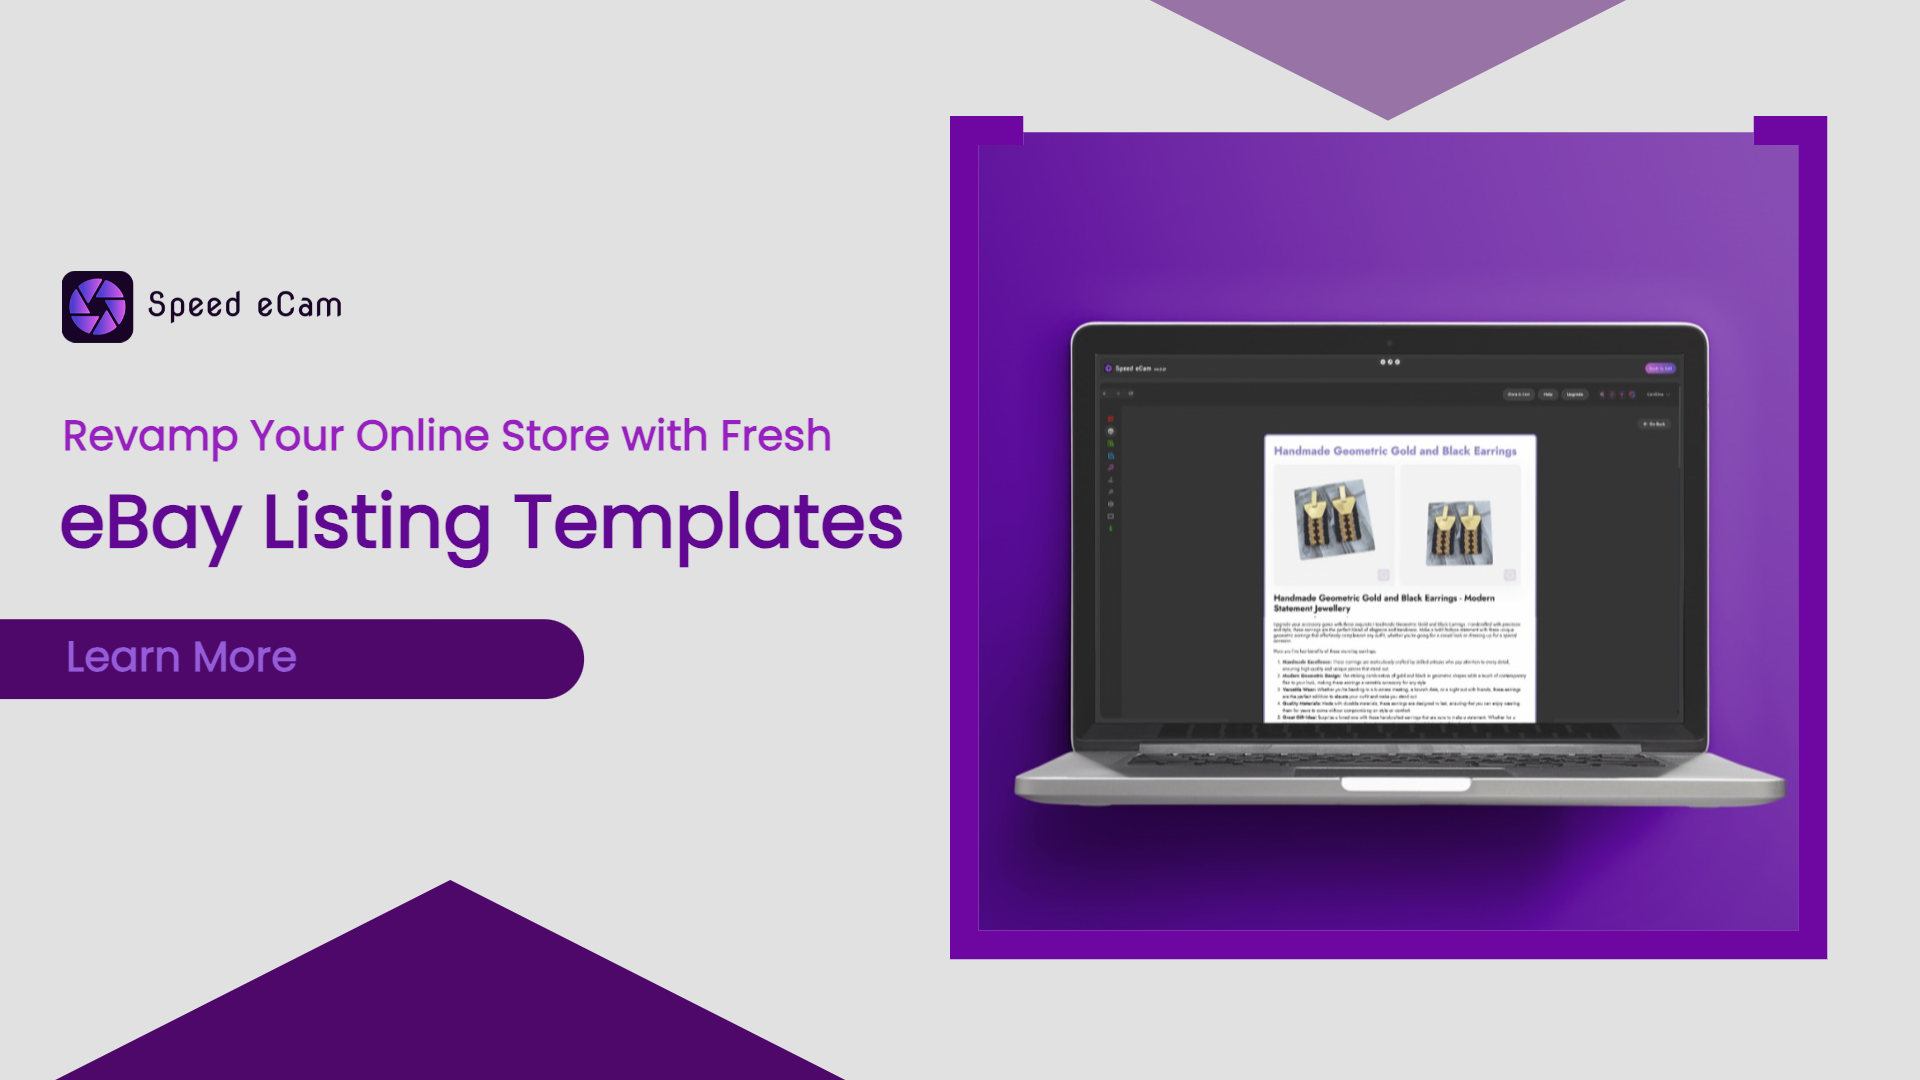 Revamp Your Online Store with Fresh eBay Listing Templates